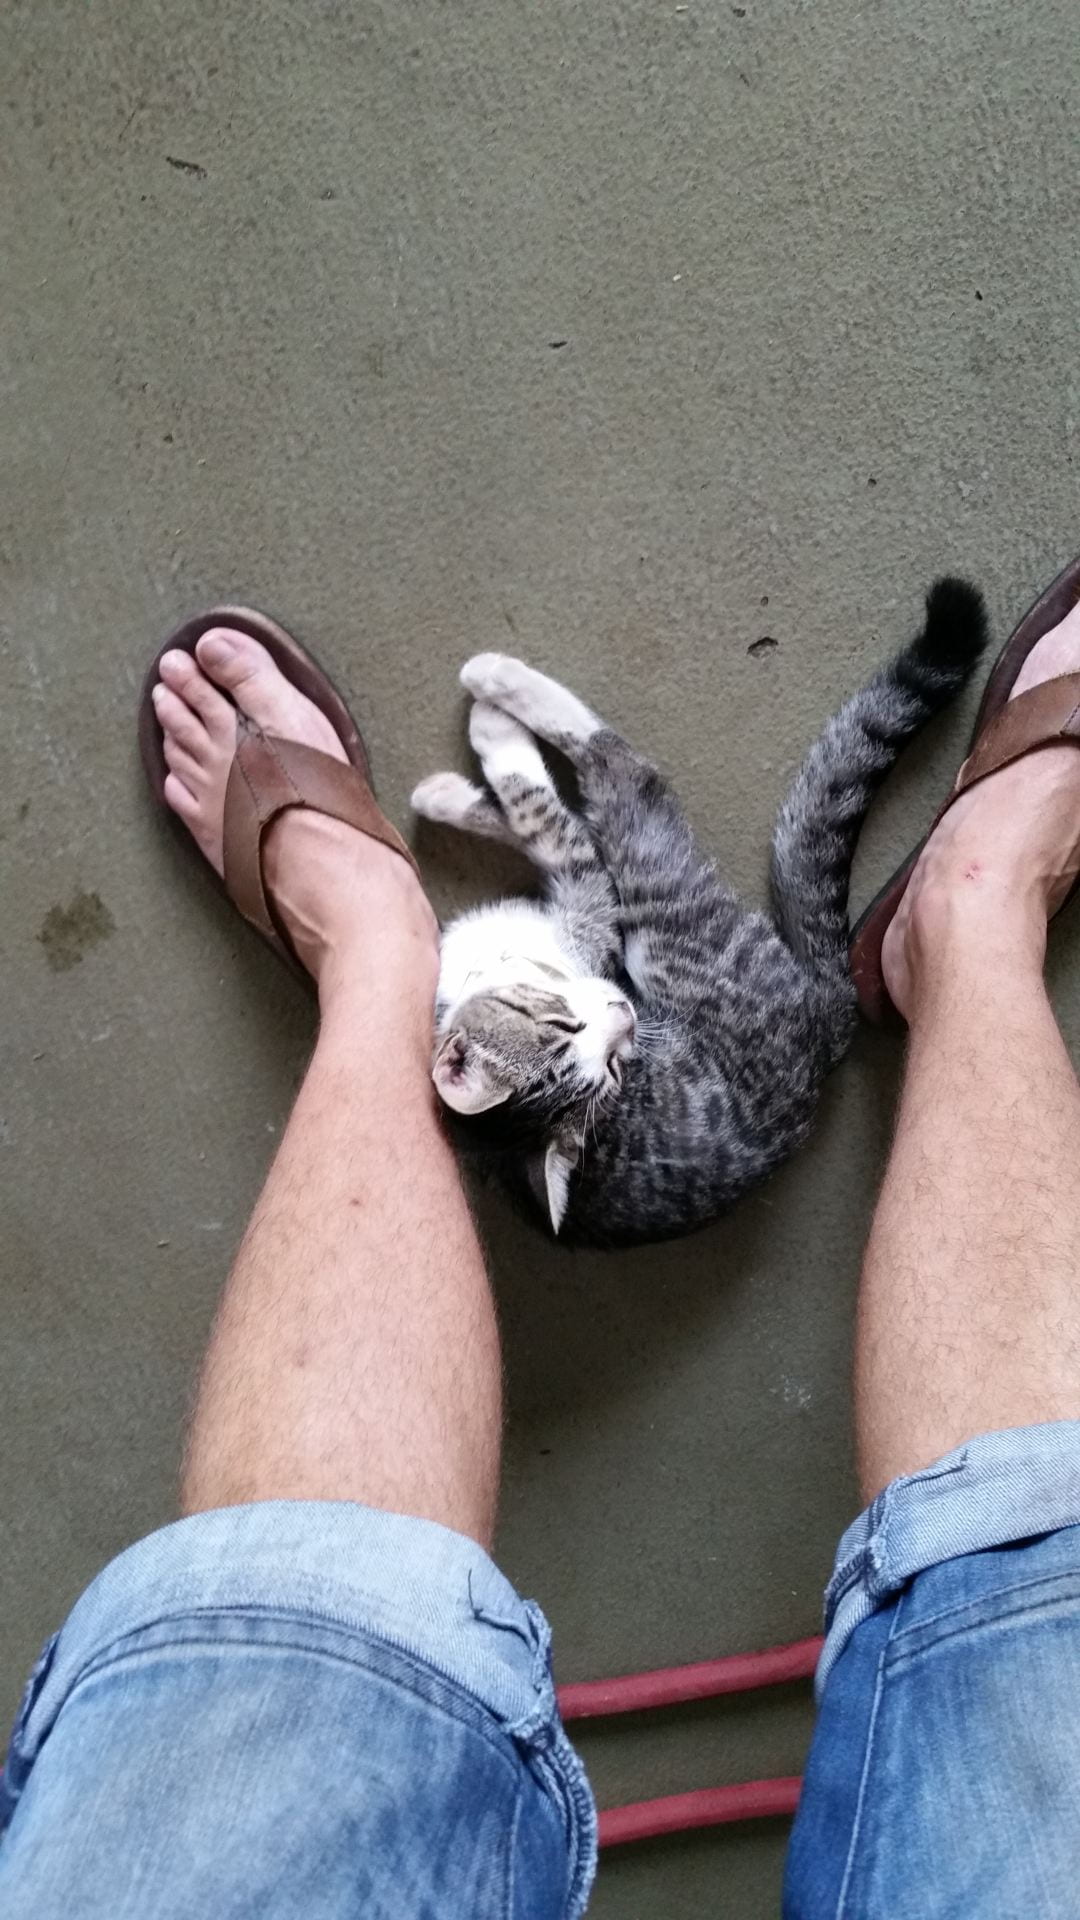 Horatio, also known as "Assistant Manager Cat," making himself comfortable between Seventh Son brewmaster Colin Vent’s feet during his first day at the brewery on Aug. 30, 2014. Credit: Colin Vent